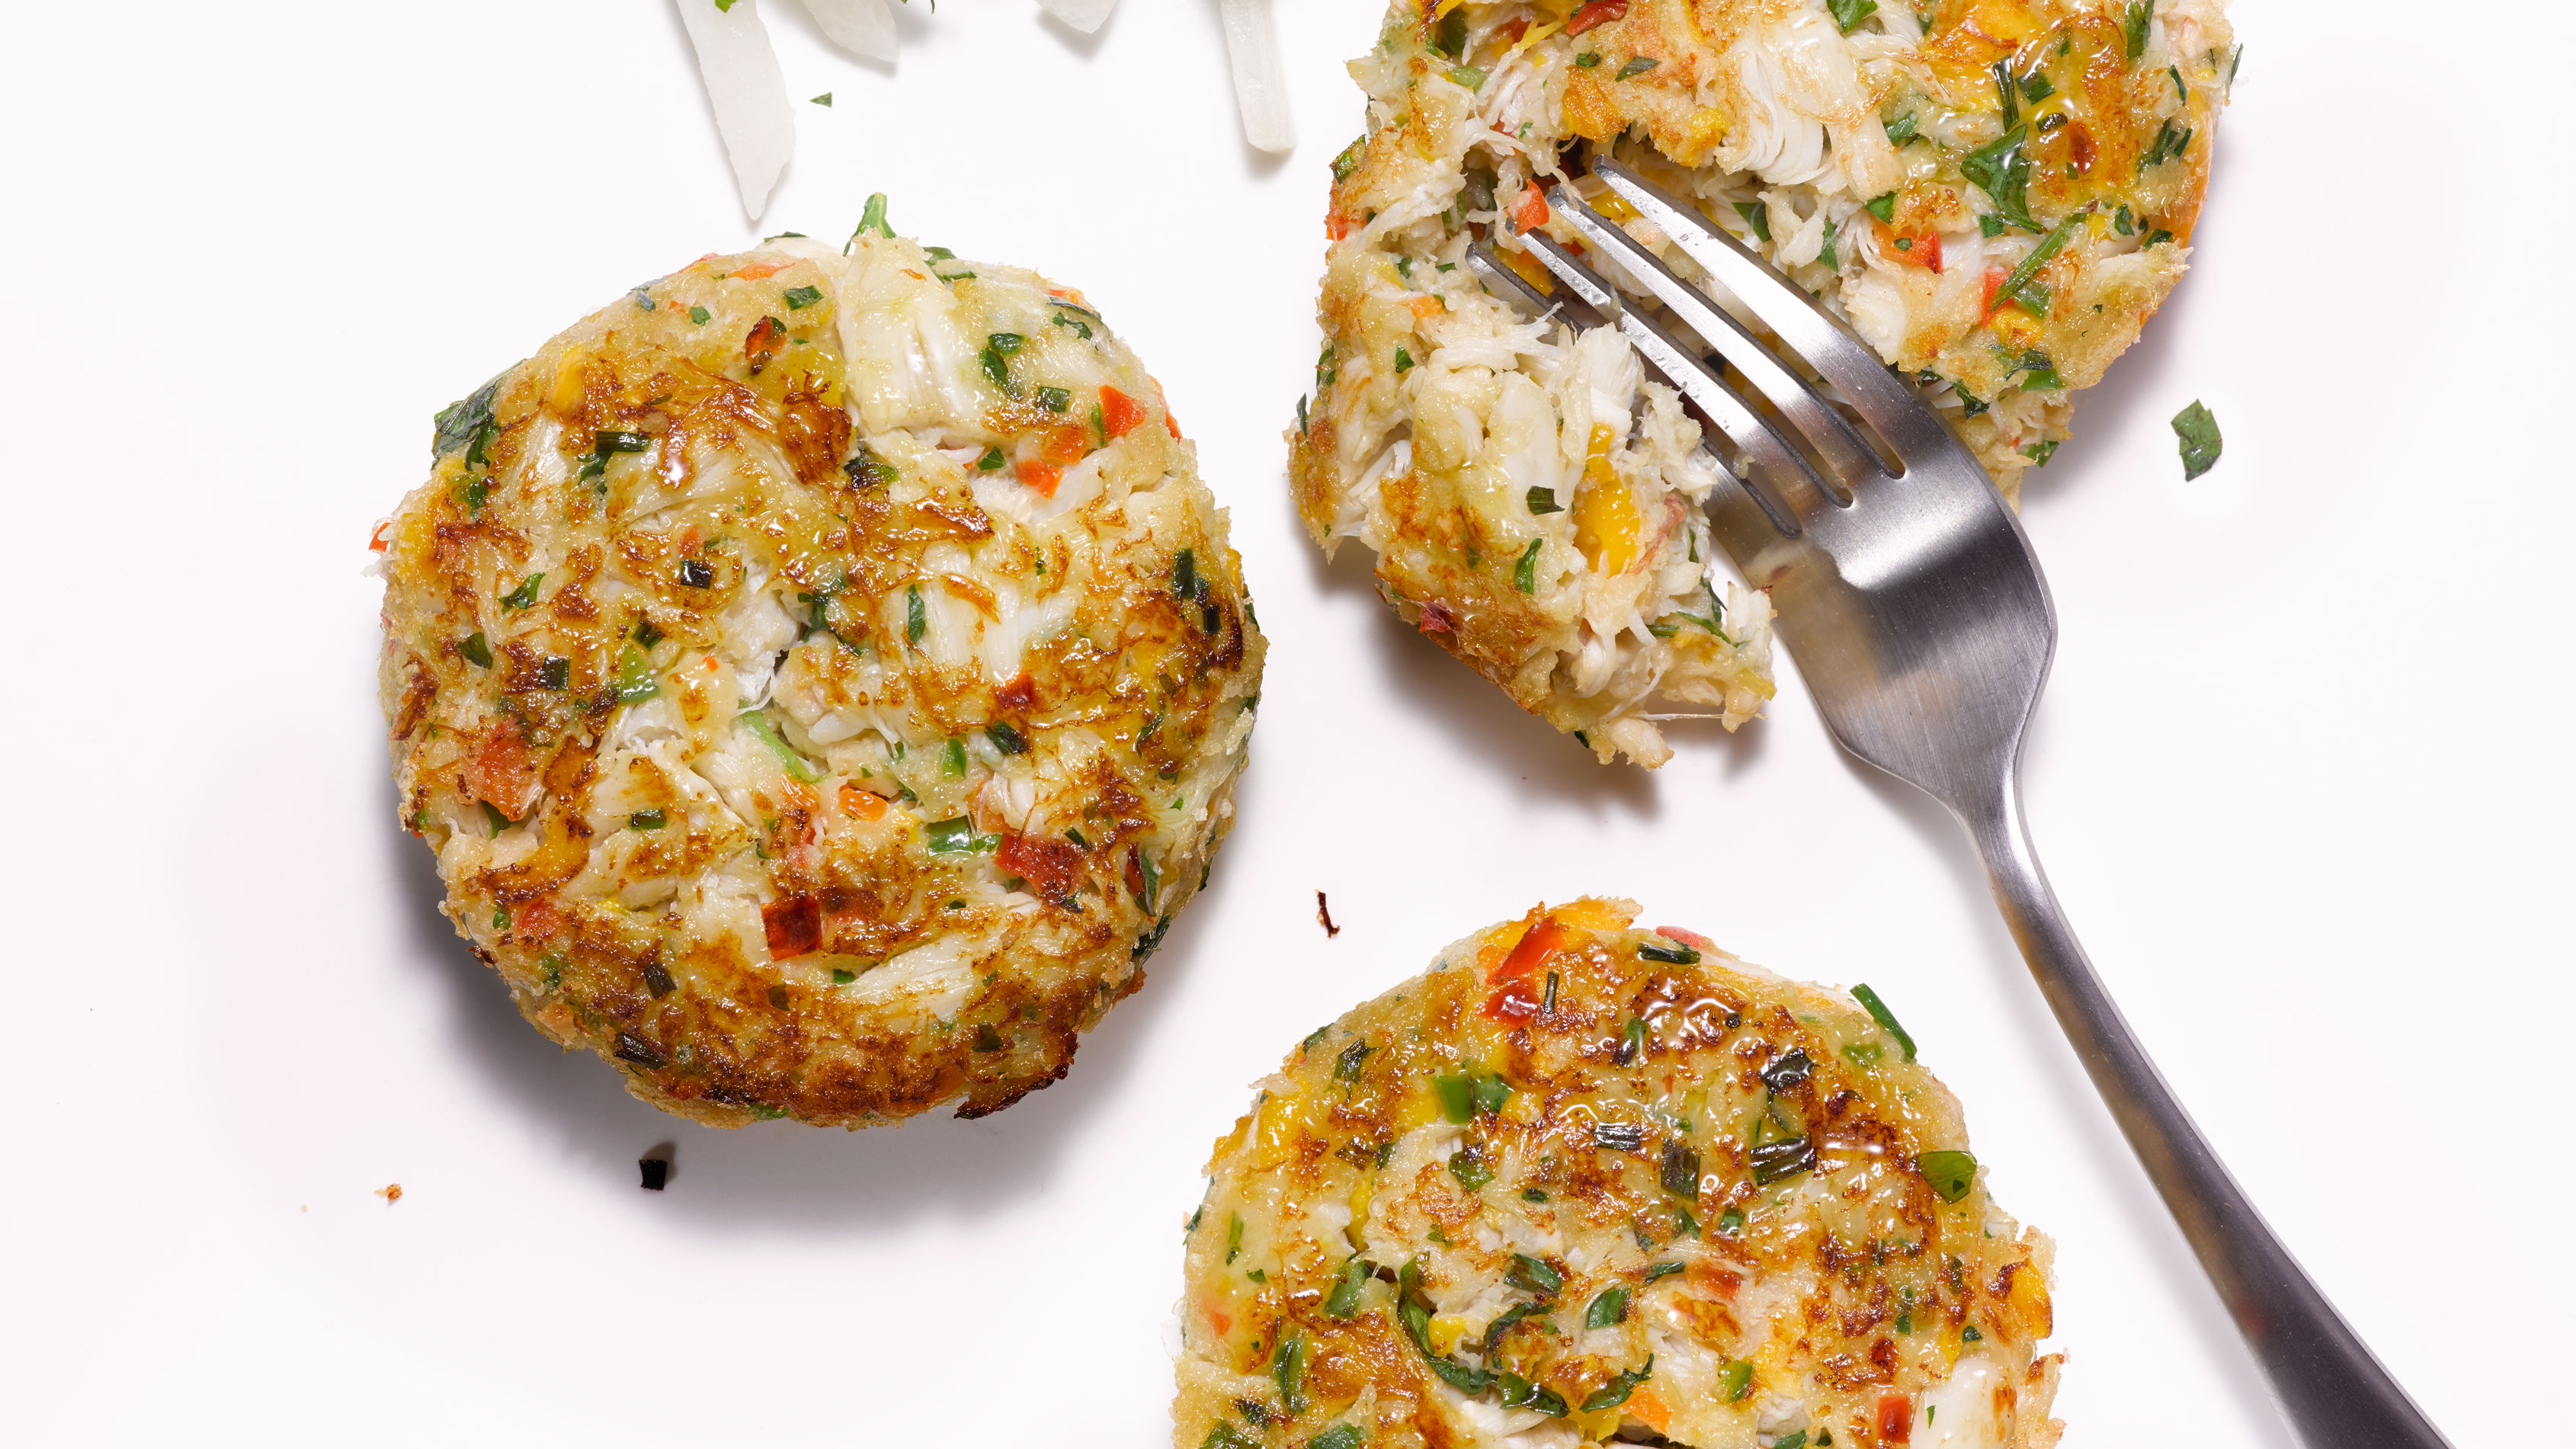 Baked Crab Cakes Recipe